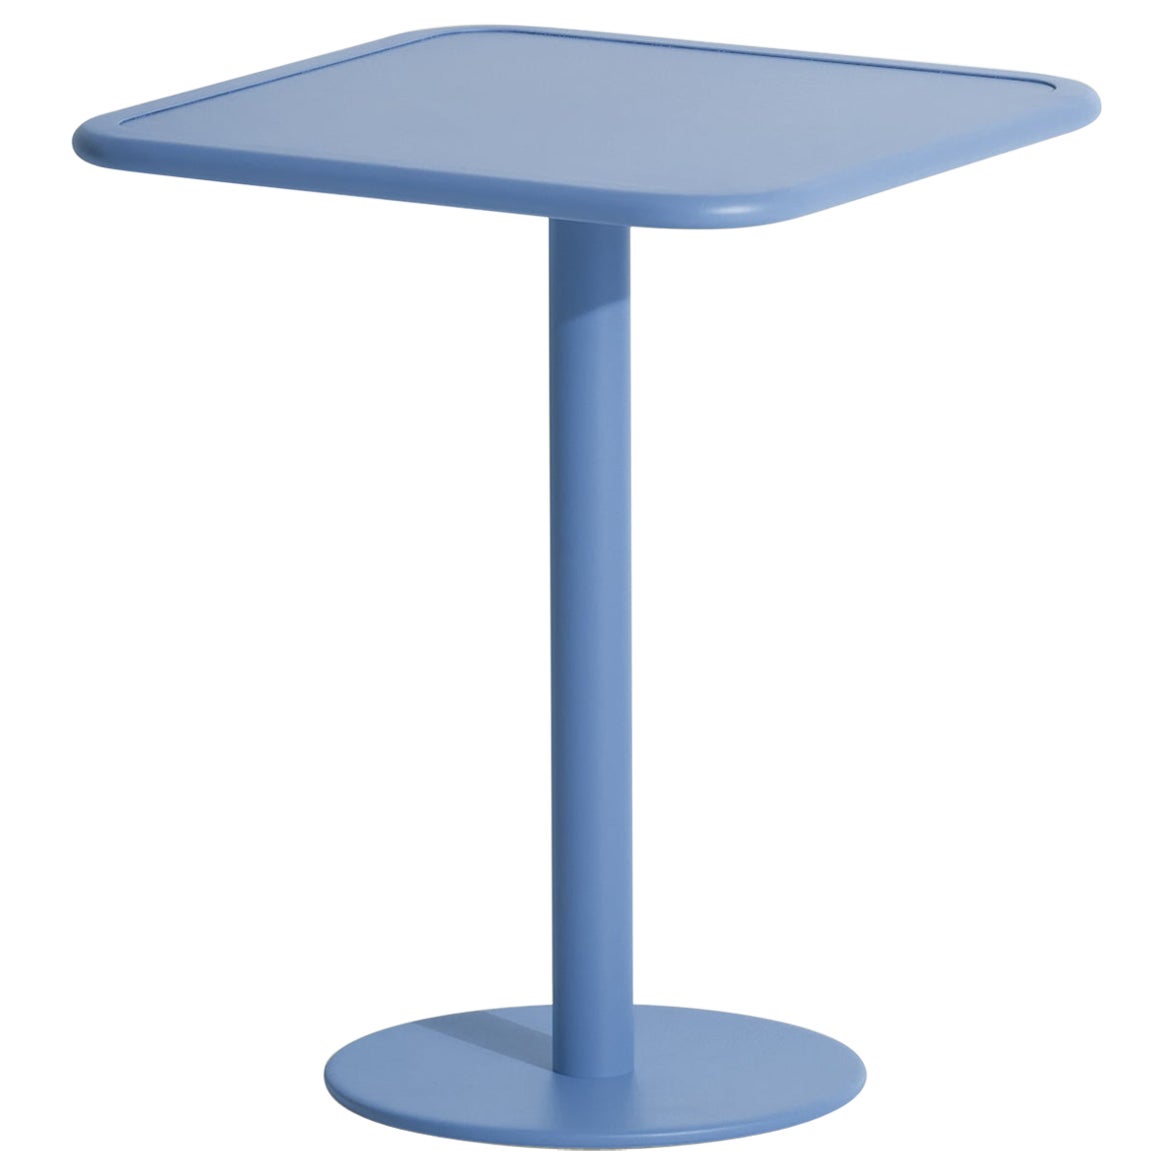 Petite Friture Week-End Bistro Square Dining Table in Azure Blue Aluminium, 2017 For Sale